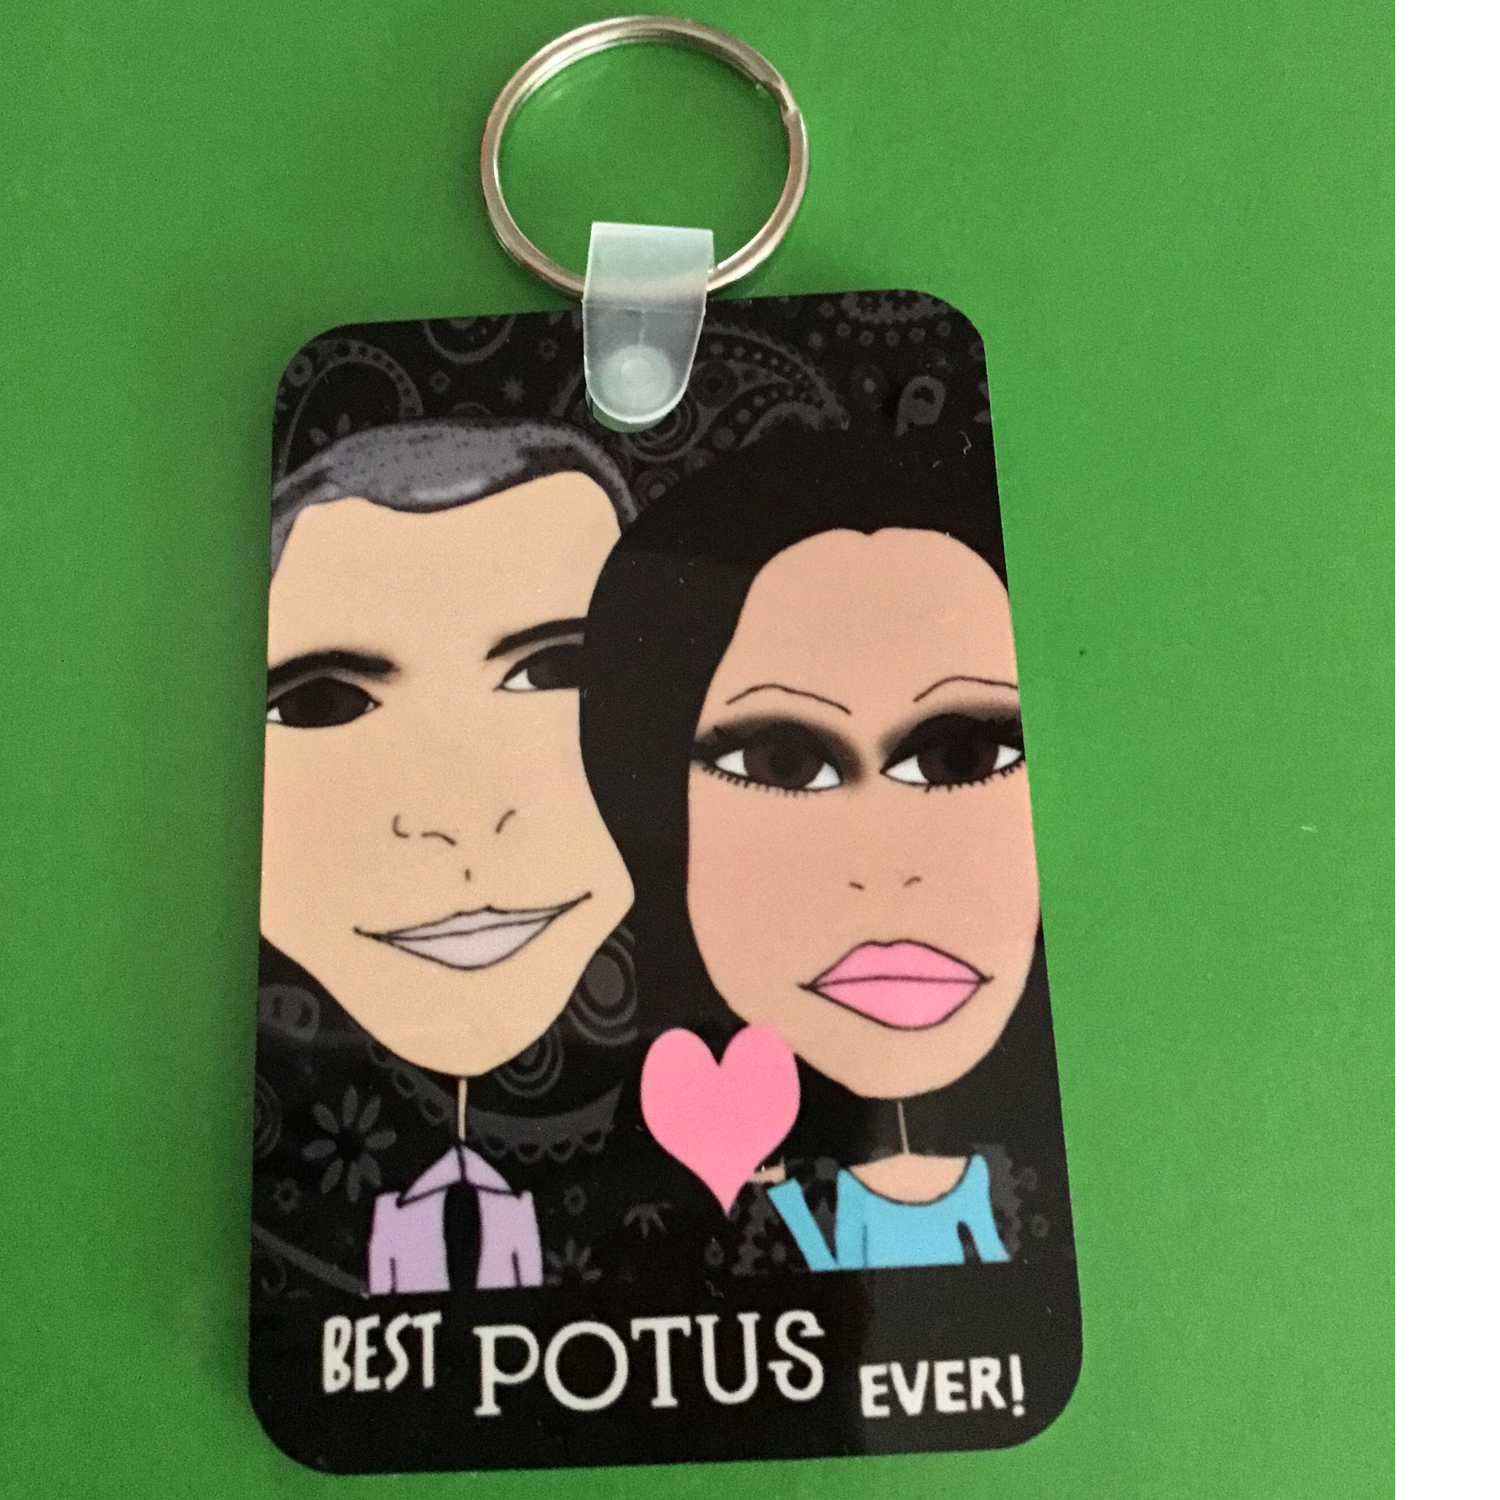 Presidential Key Chain made with sublimation printing